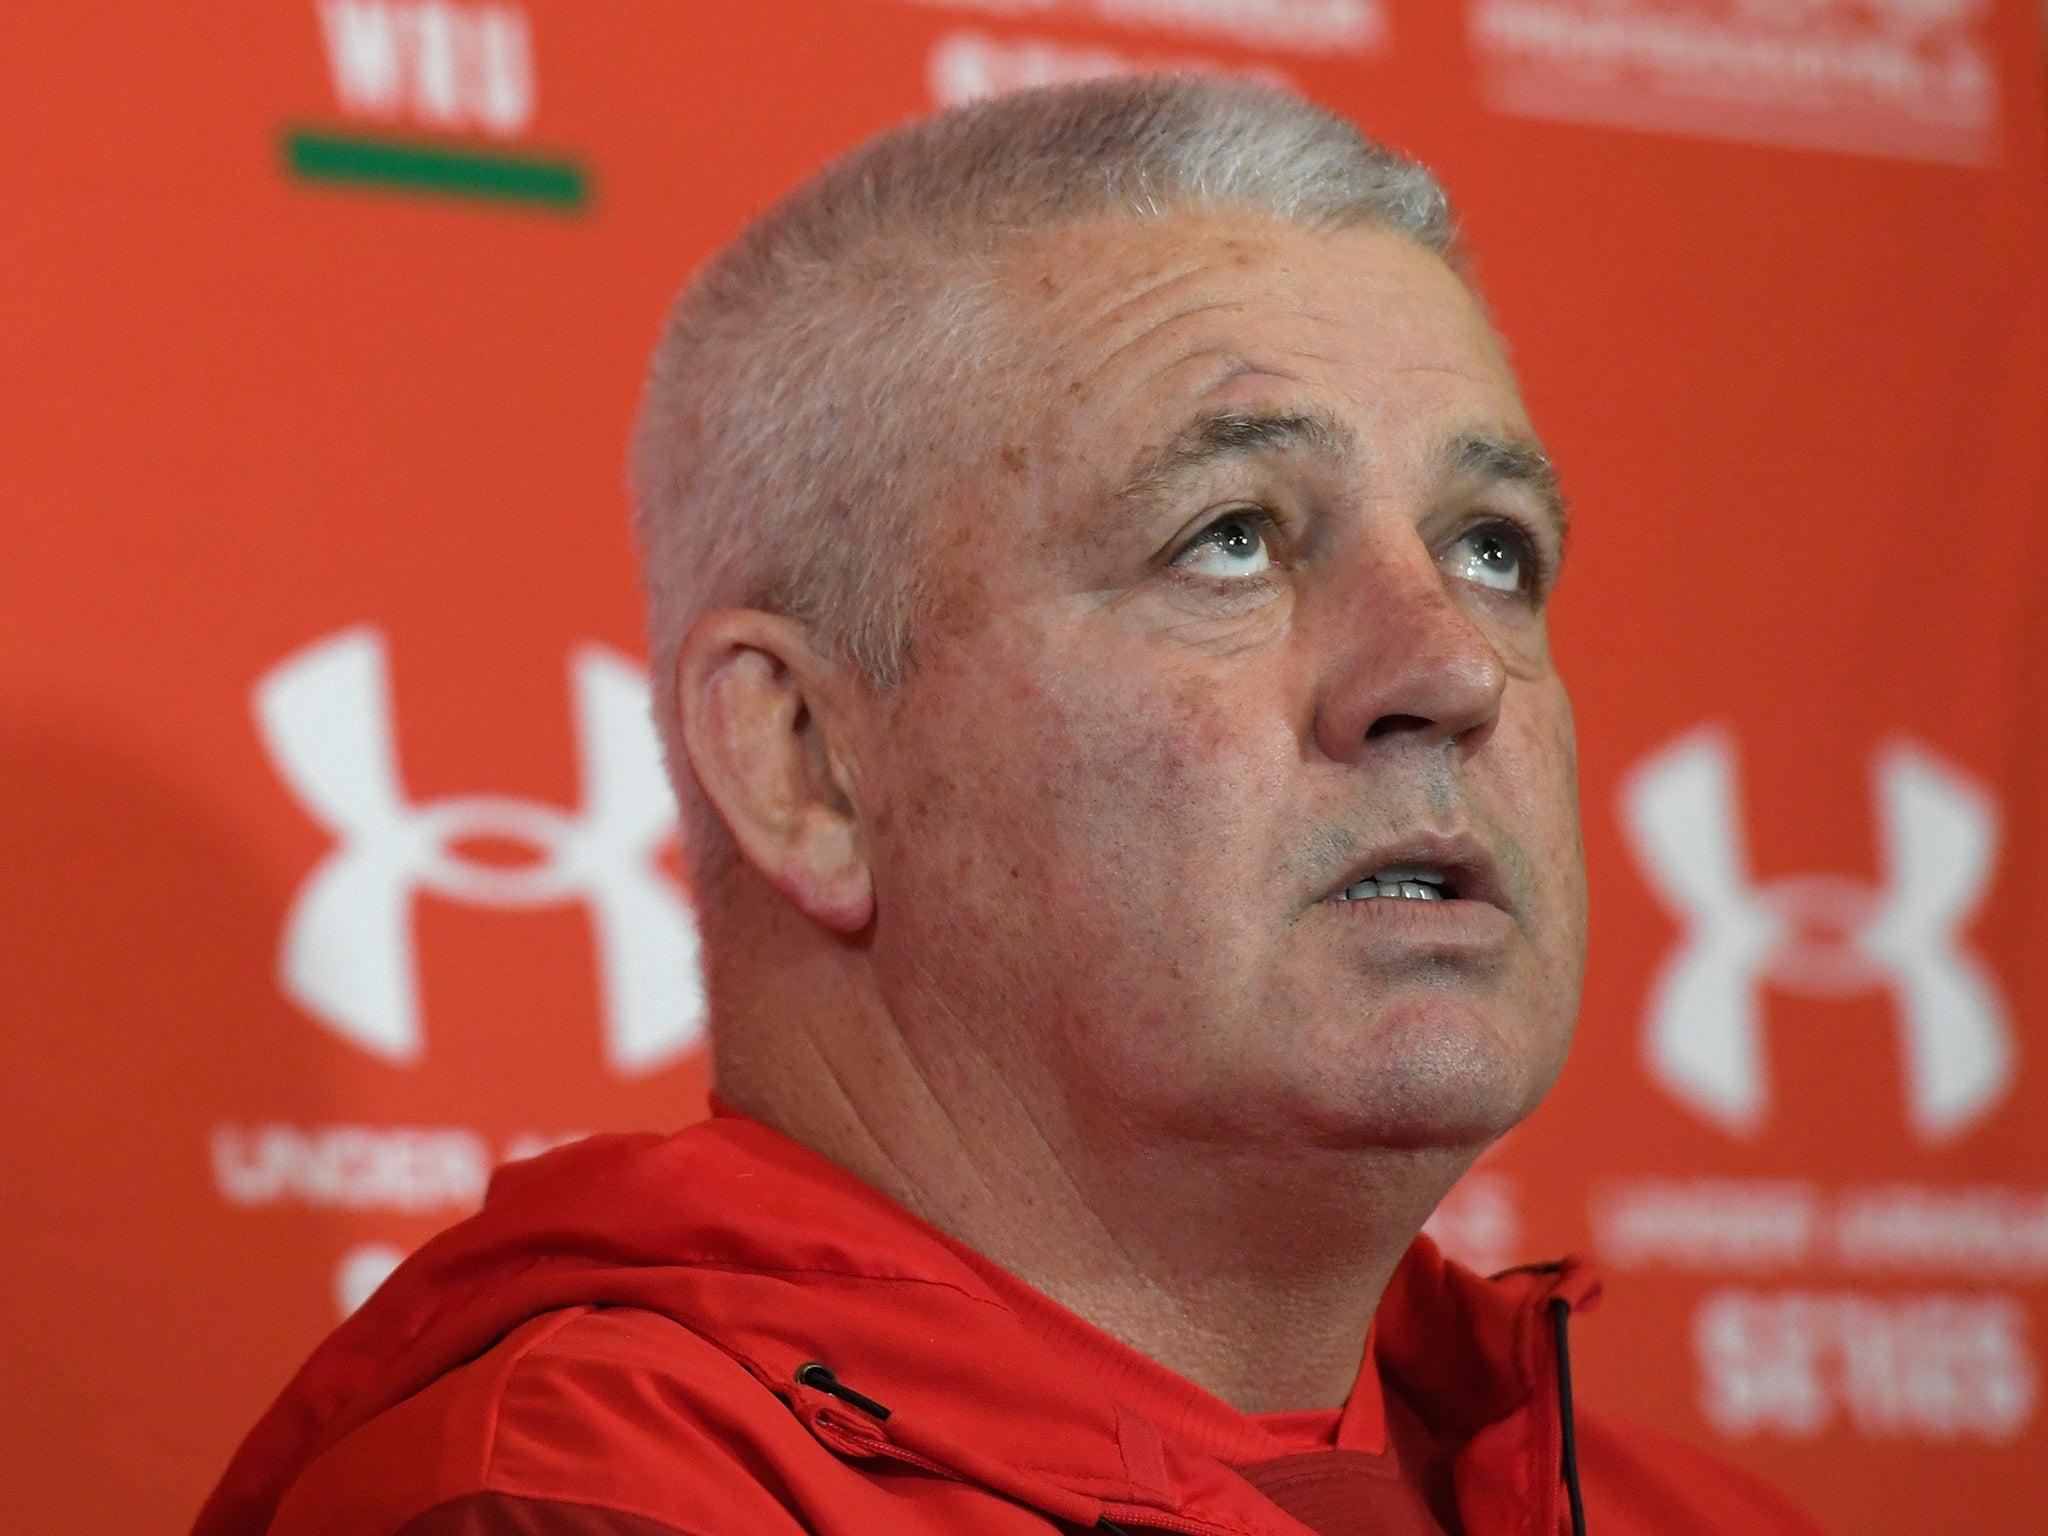 Gatland will hope that a strong autumn international programme will reduce the post-Lions criticism that he has faced